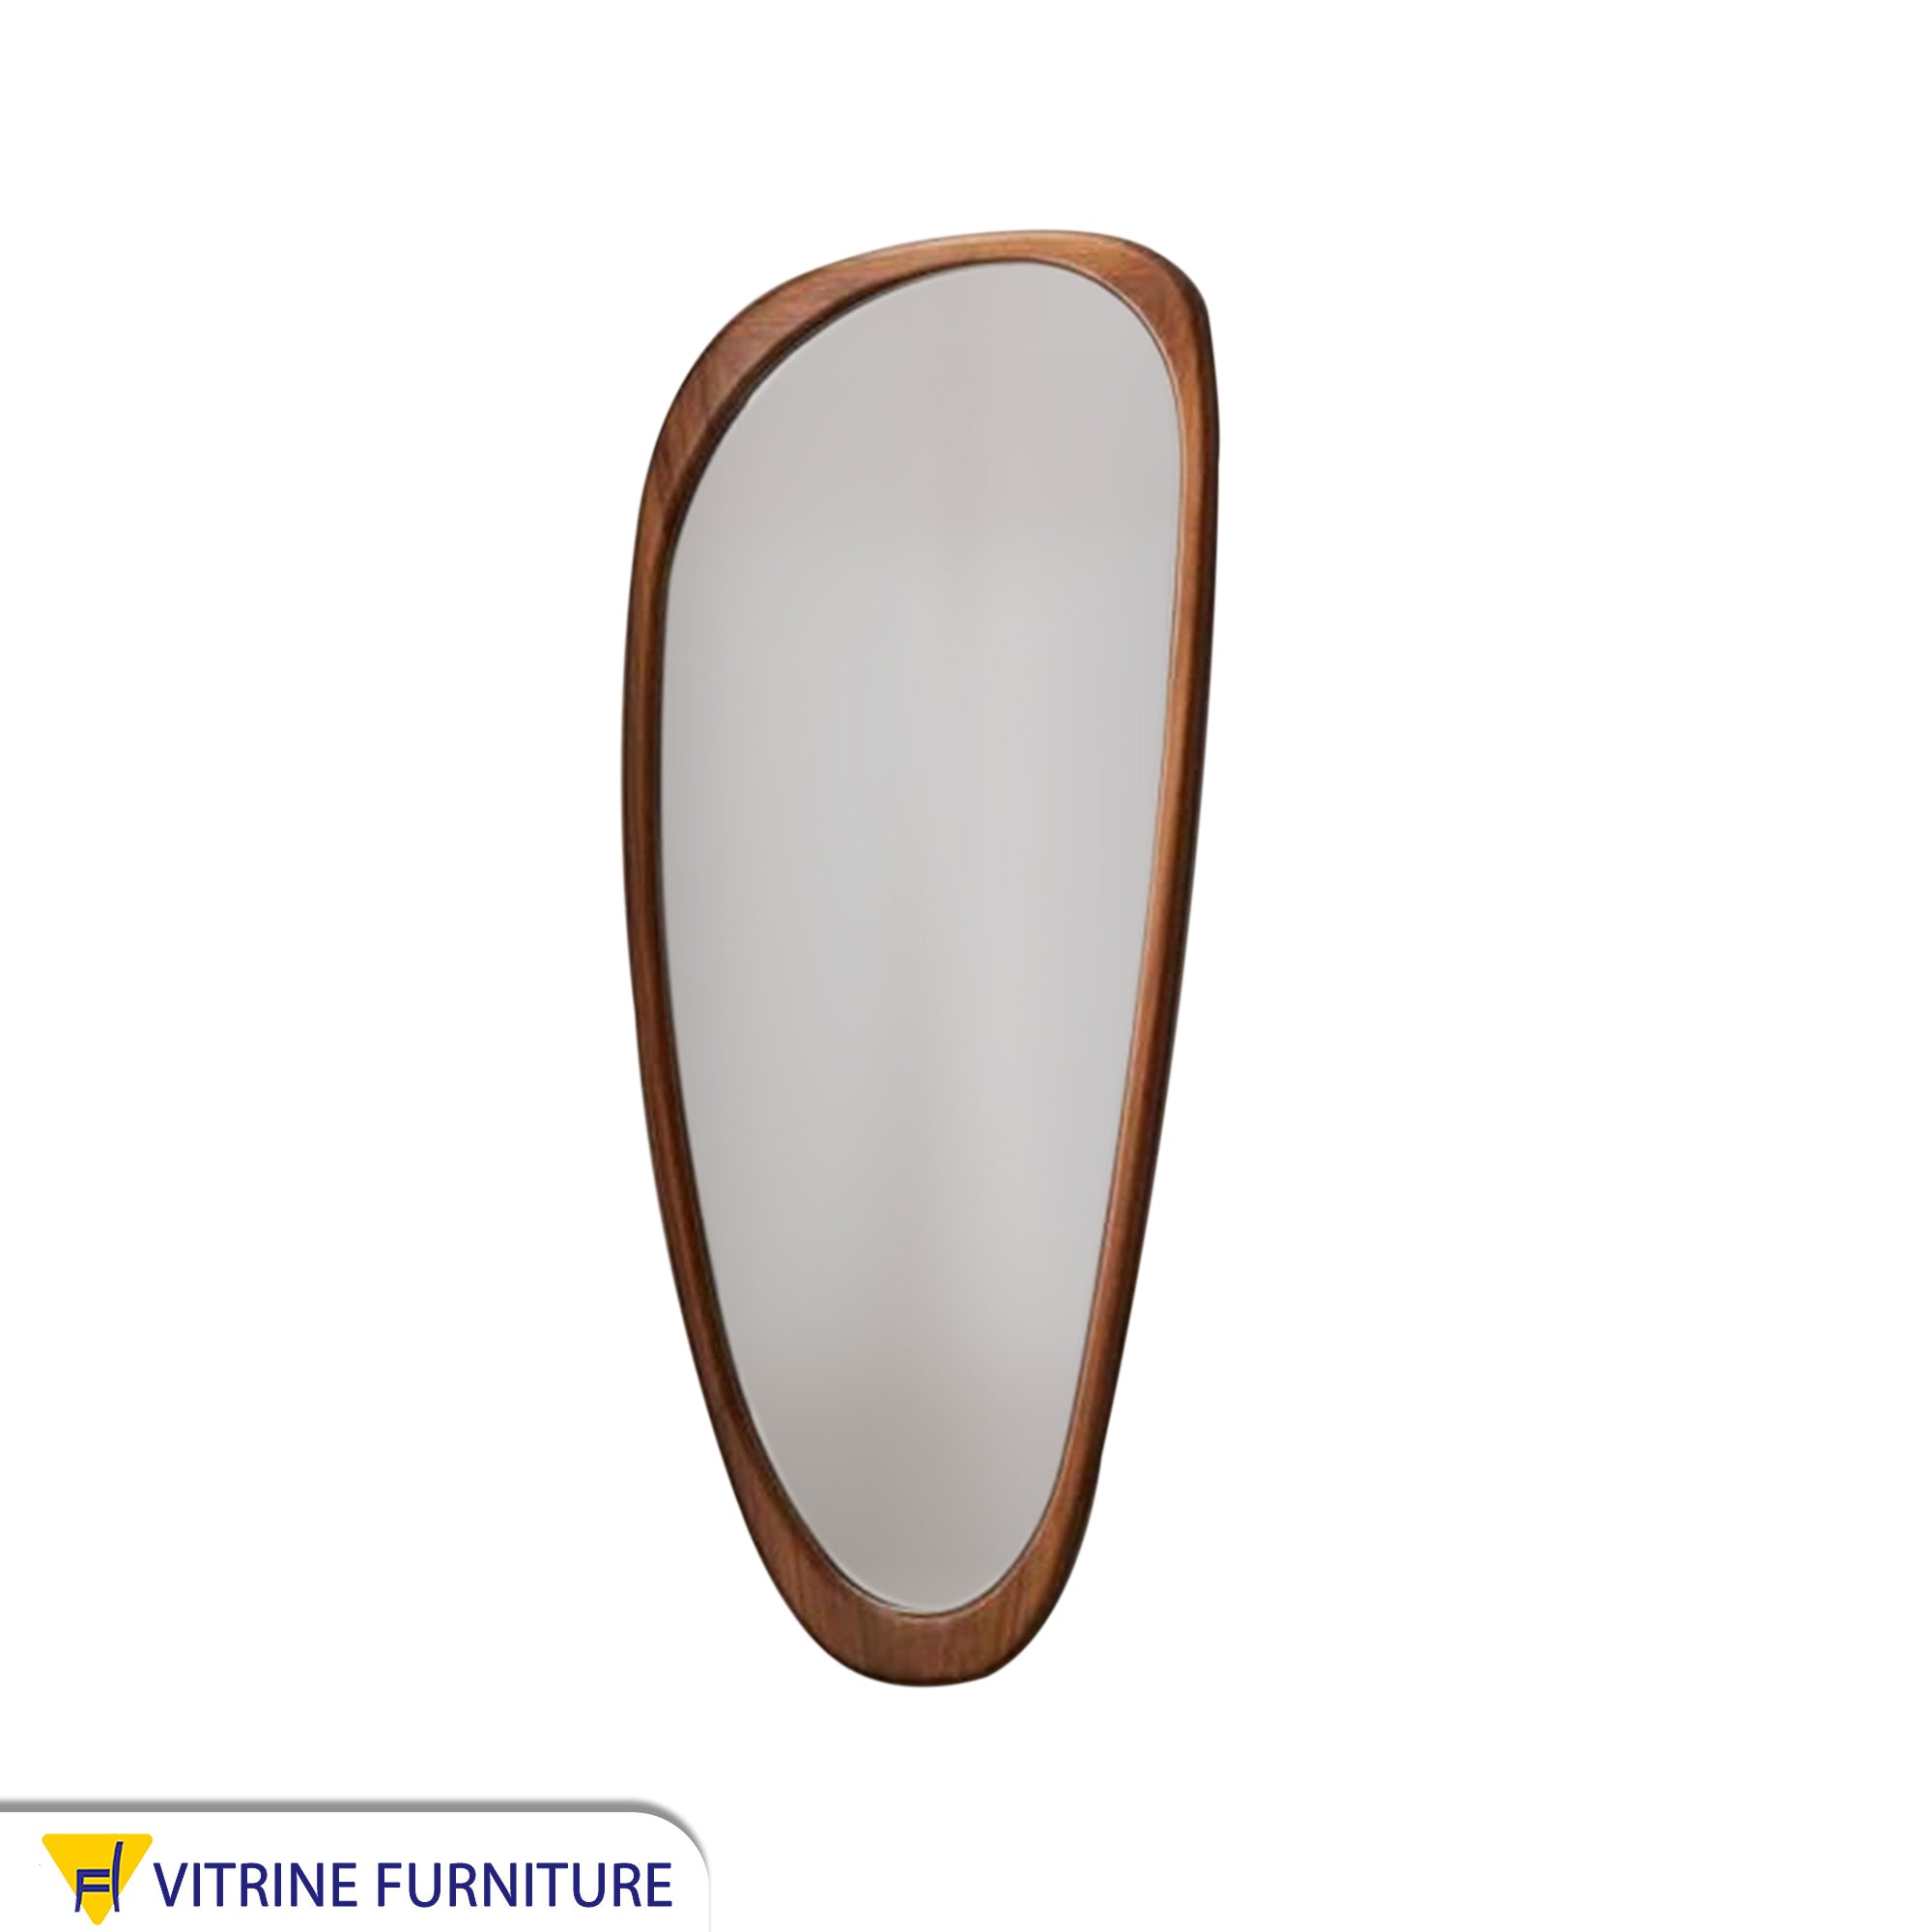 Modern aesthetic mirror 60*160 with brown frame